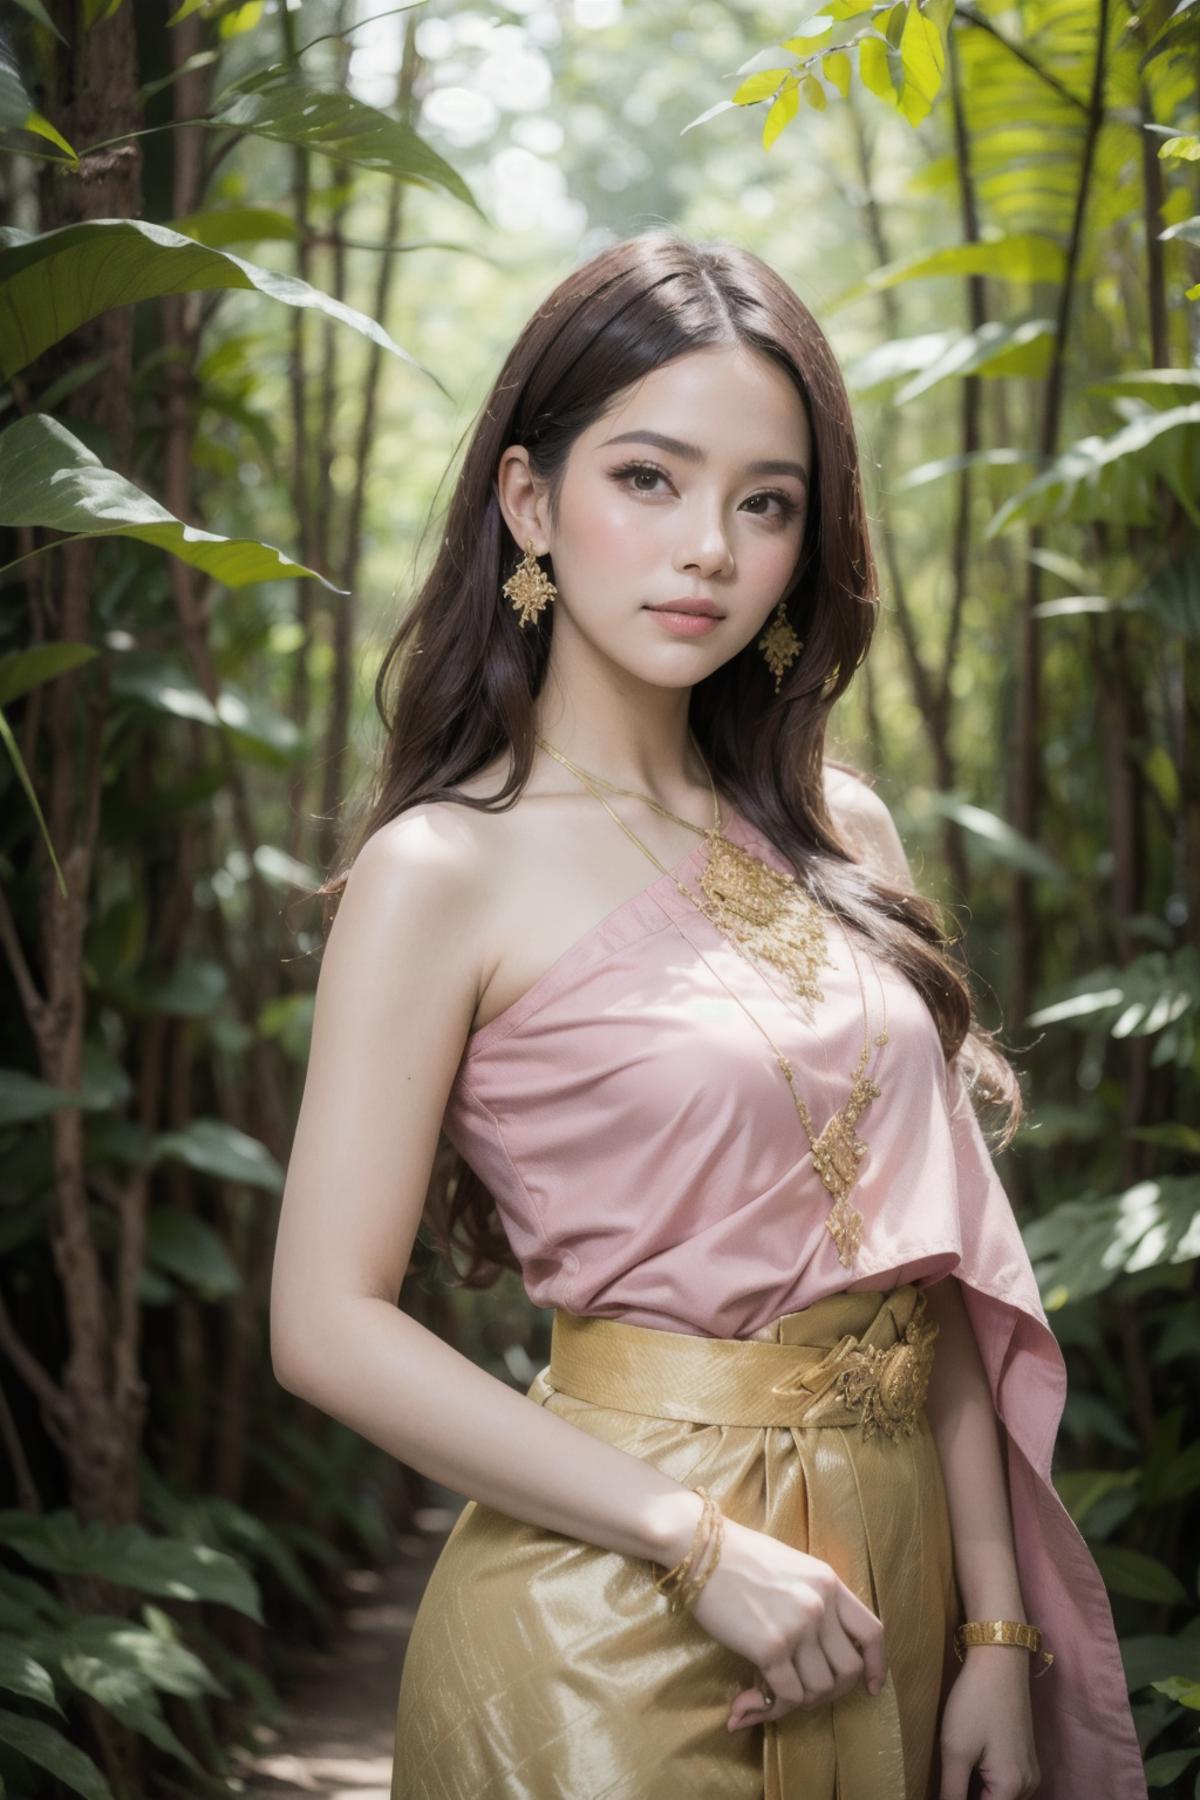 Thailand Tradition Dress image by RamilTH